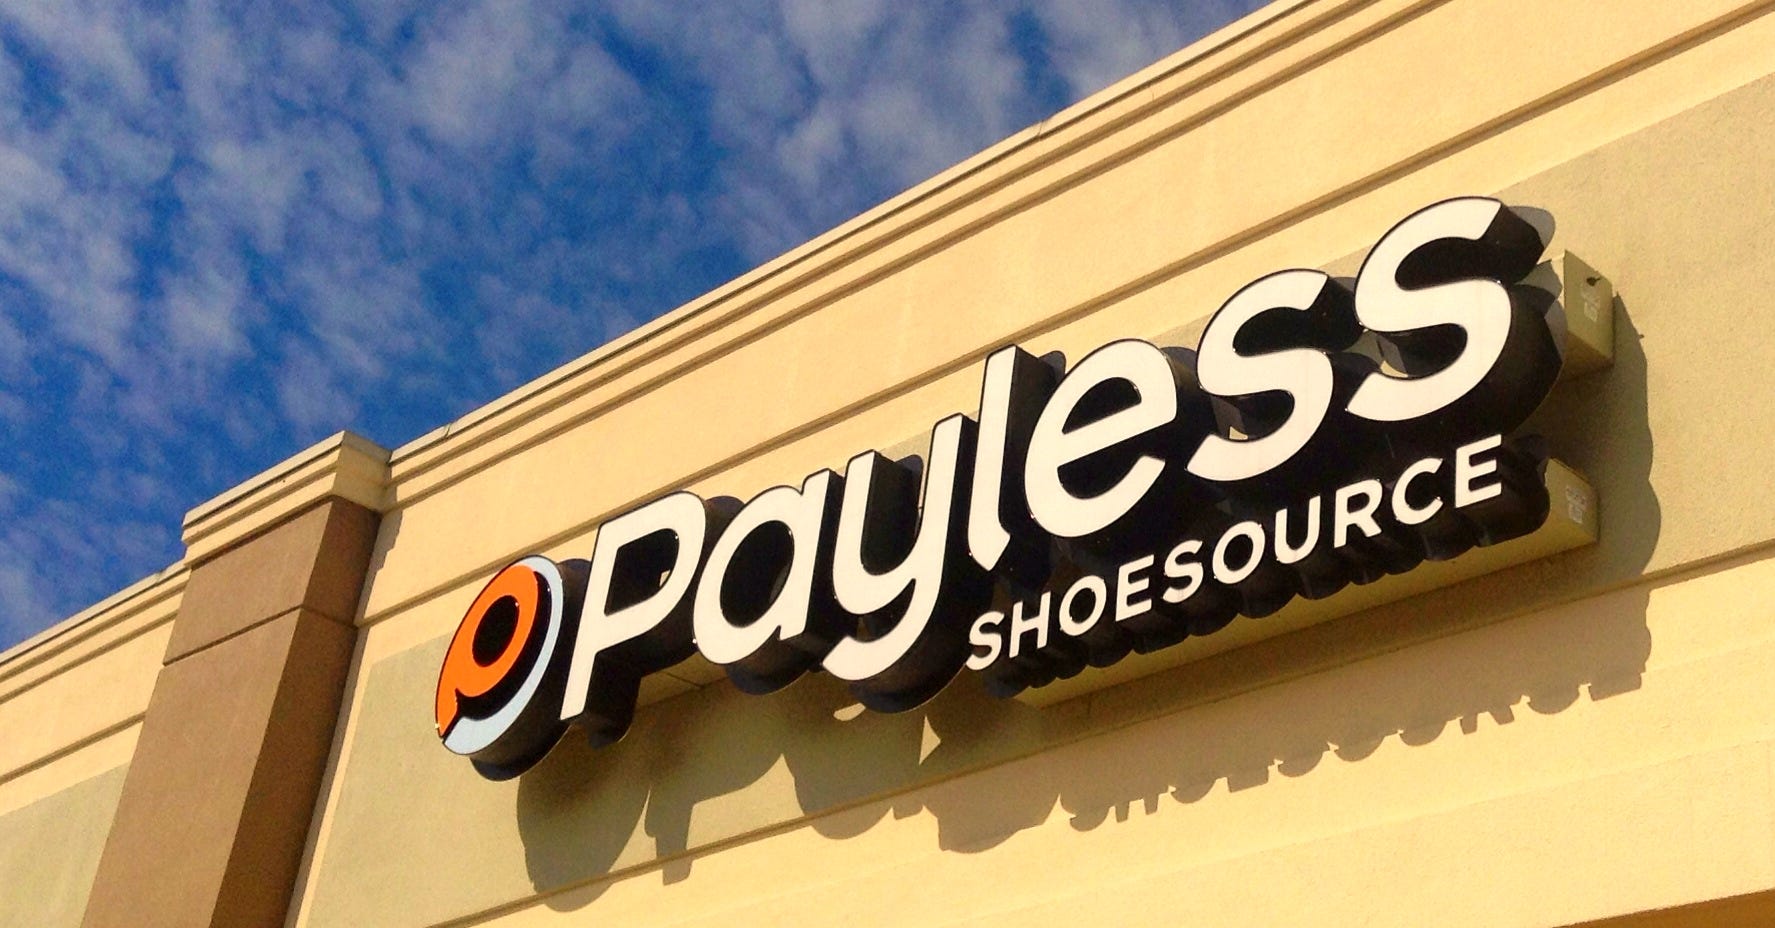 payless shoes financials